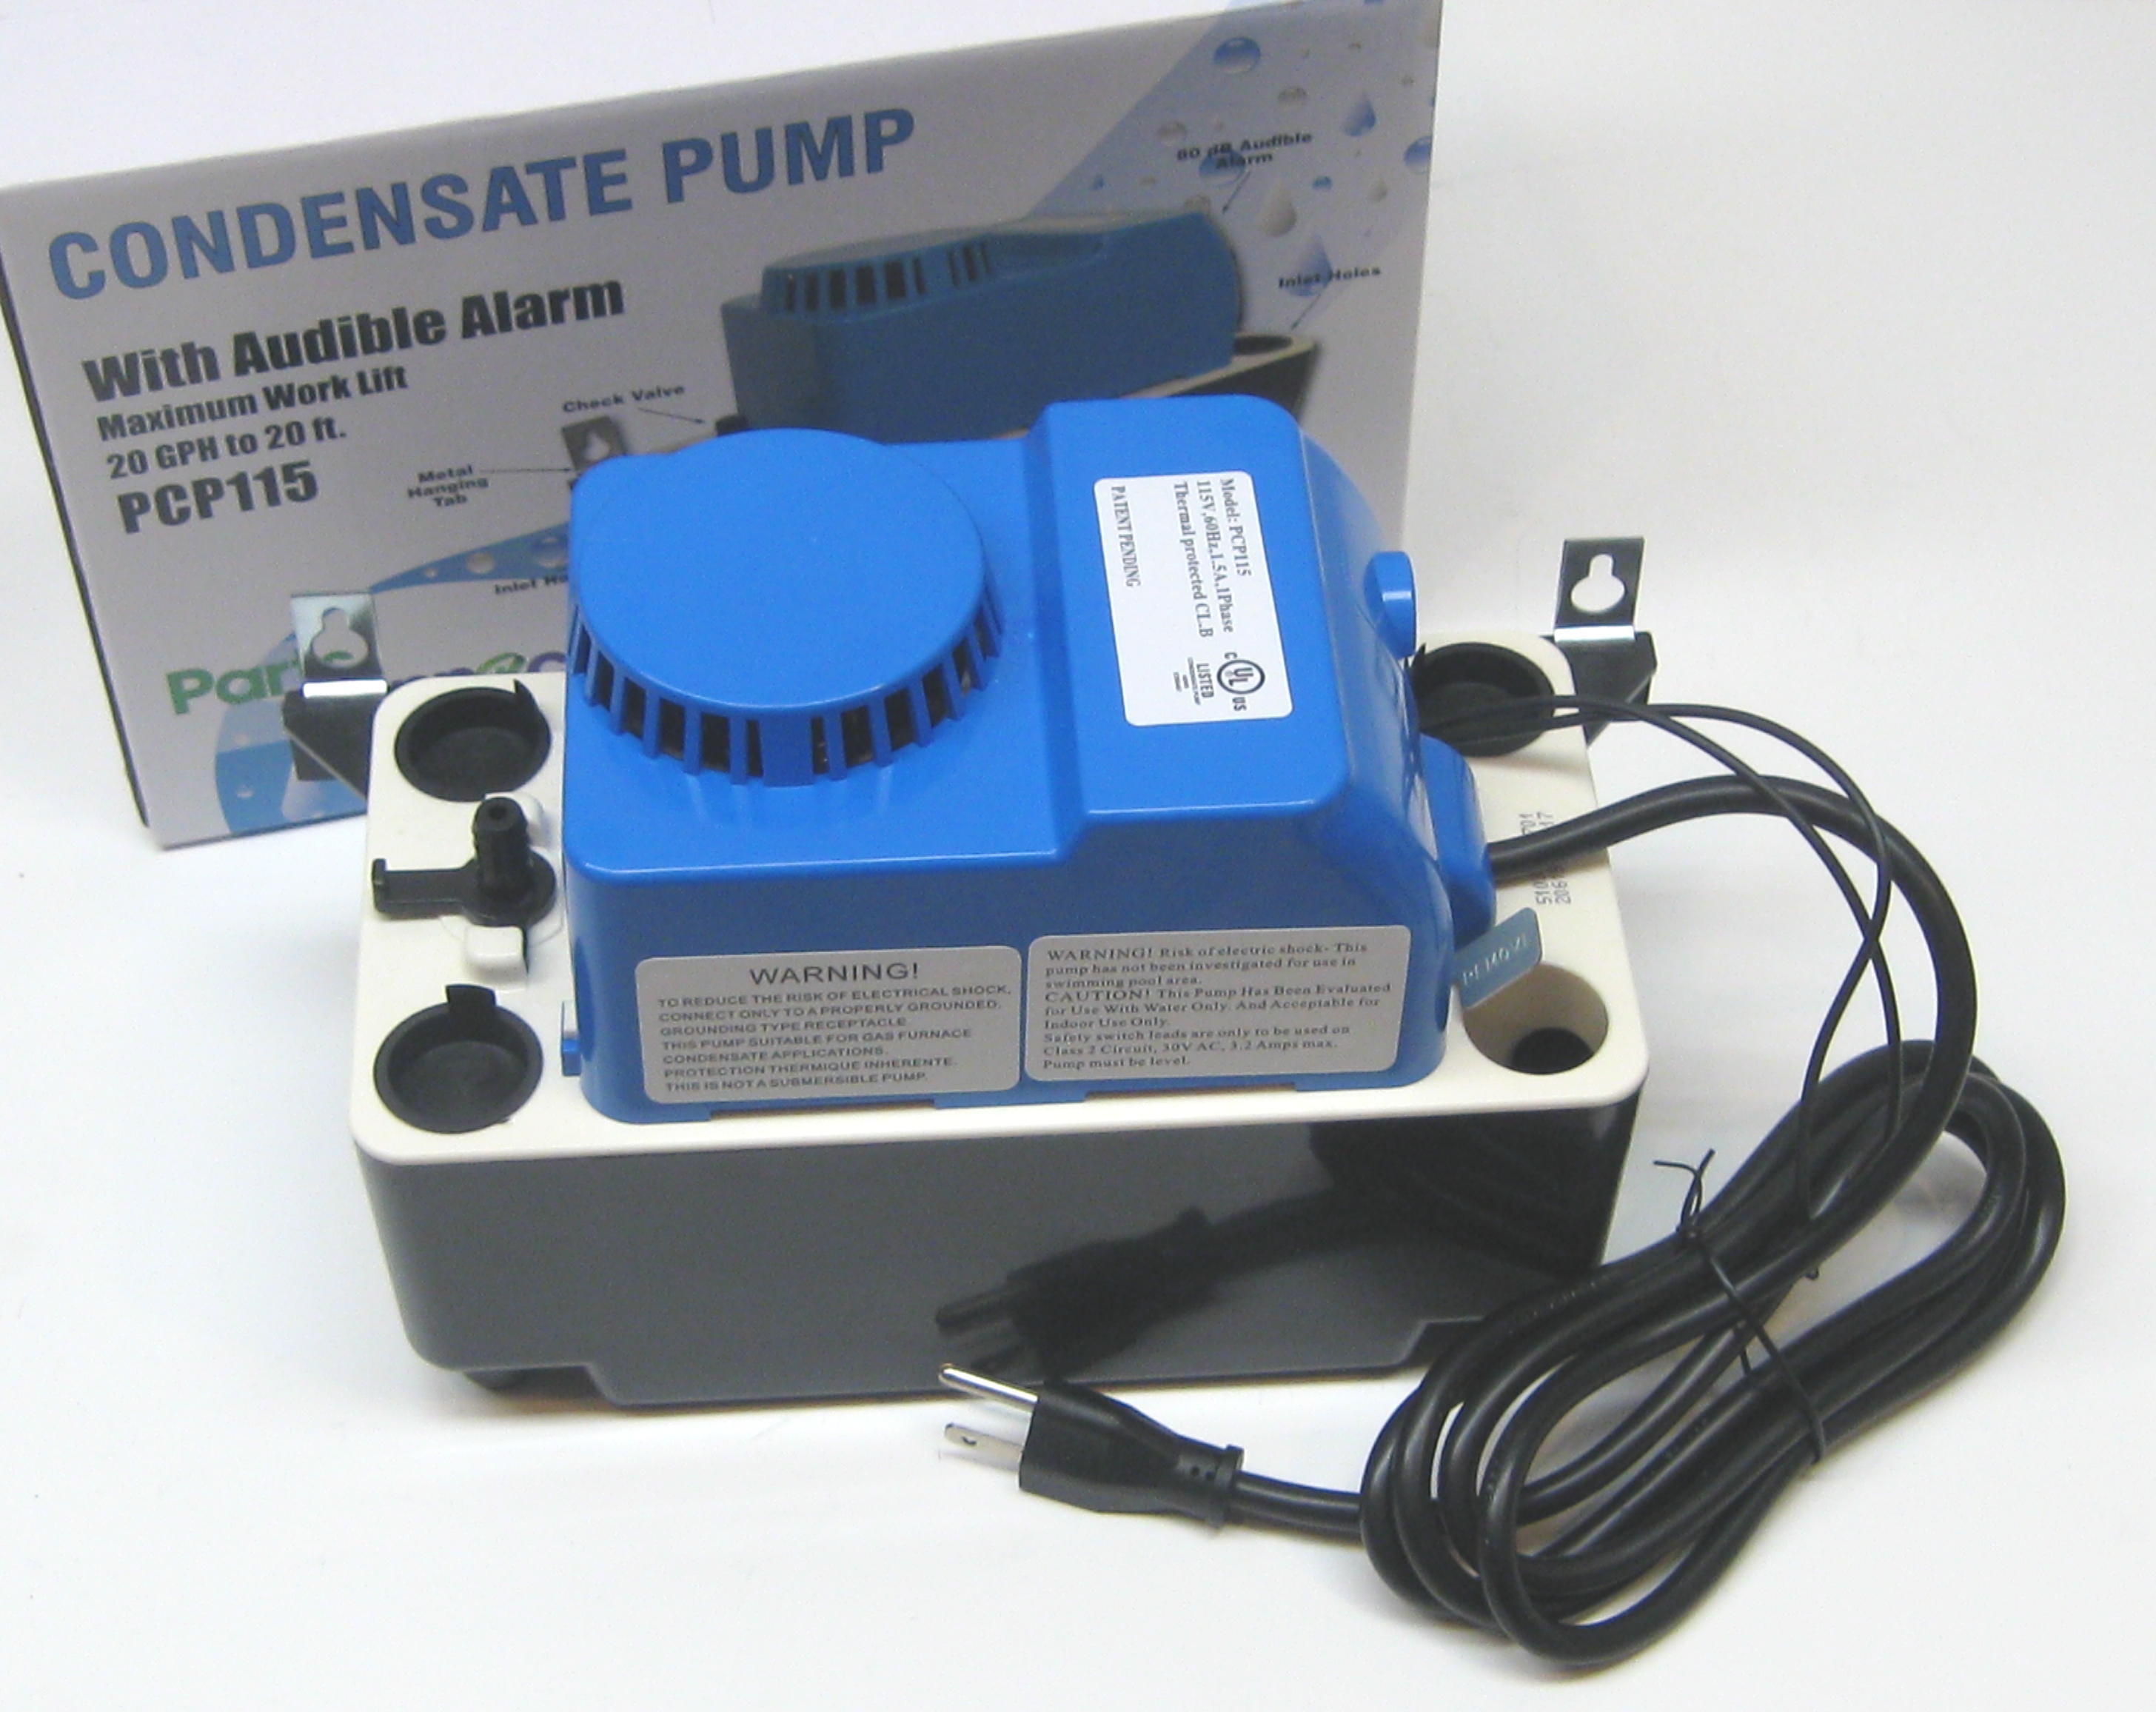 Air Conditioning Pump Automatic Condensate Pump Silent Condensate Lift Removal System Assembly Parts 110‑240V 50‑60HZ